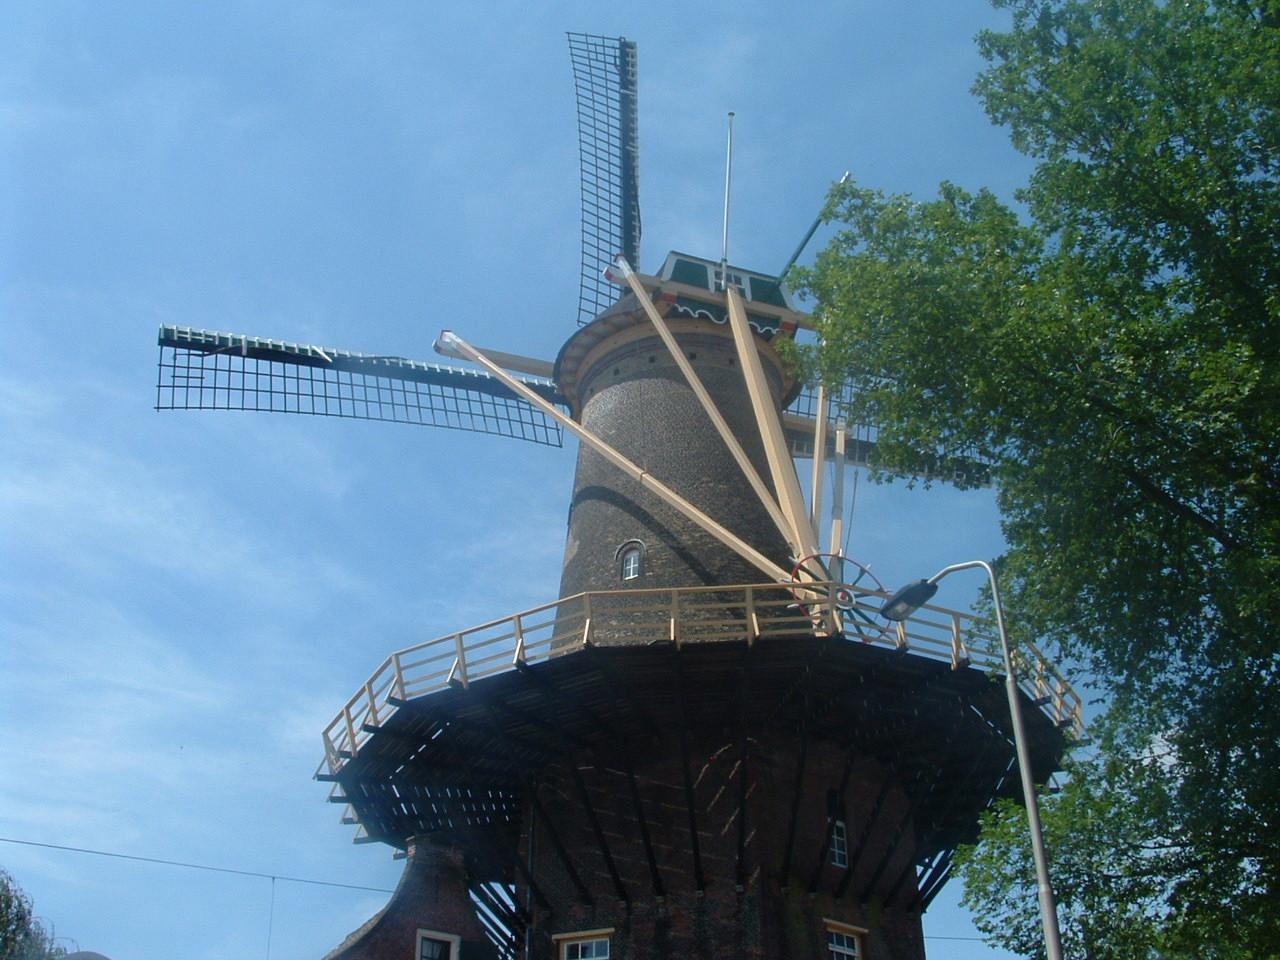 The Netherlands - Delft Windmill #1